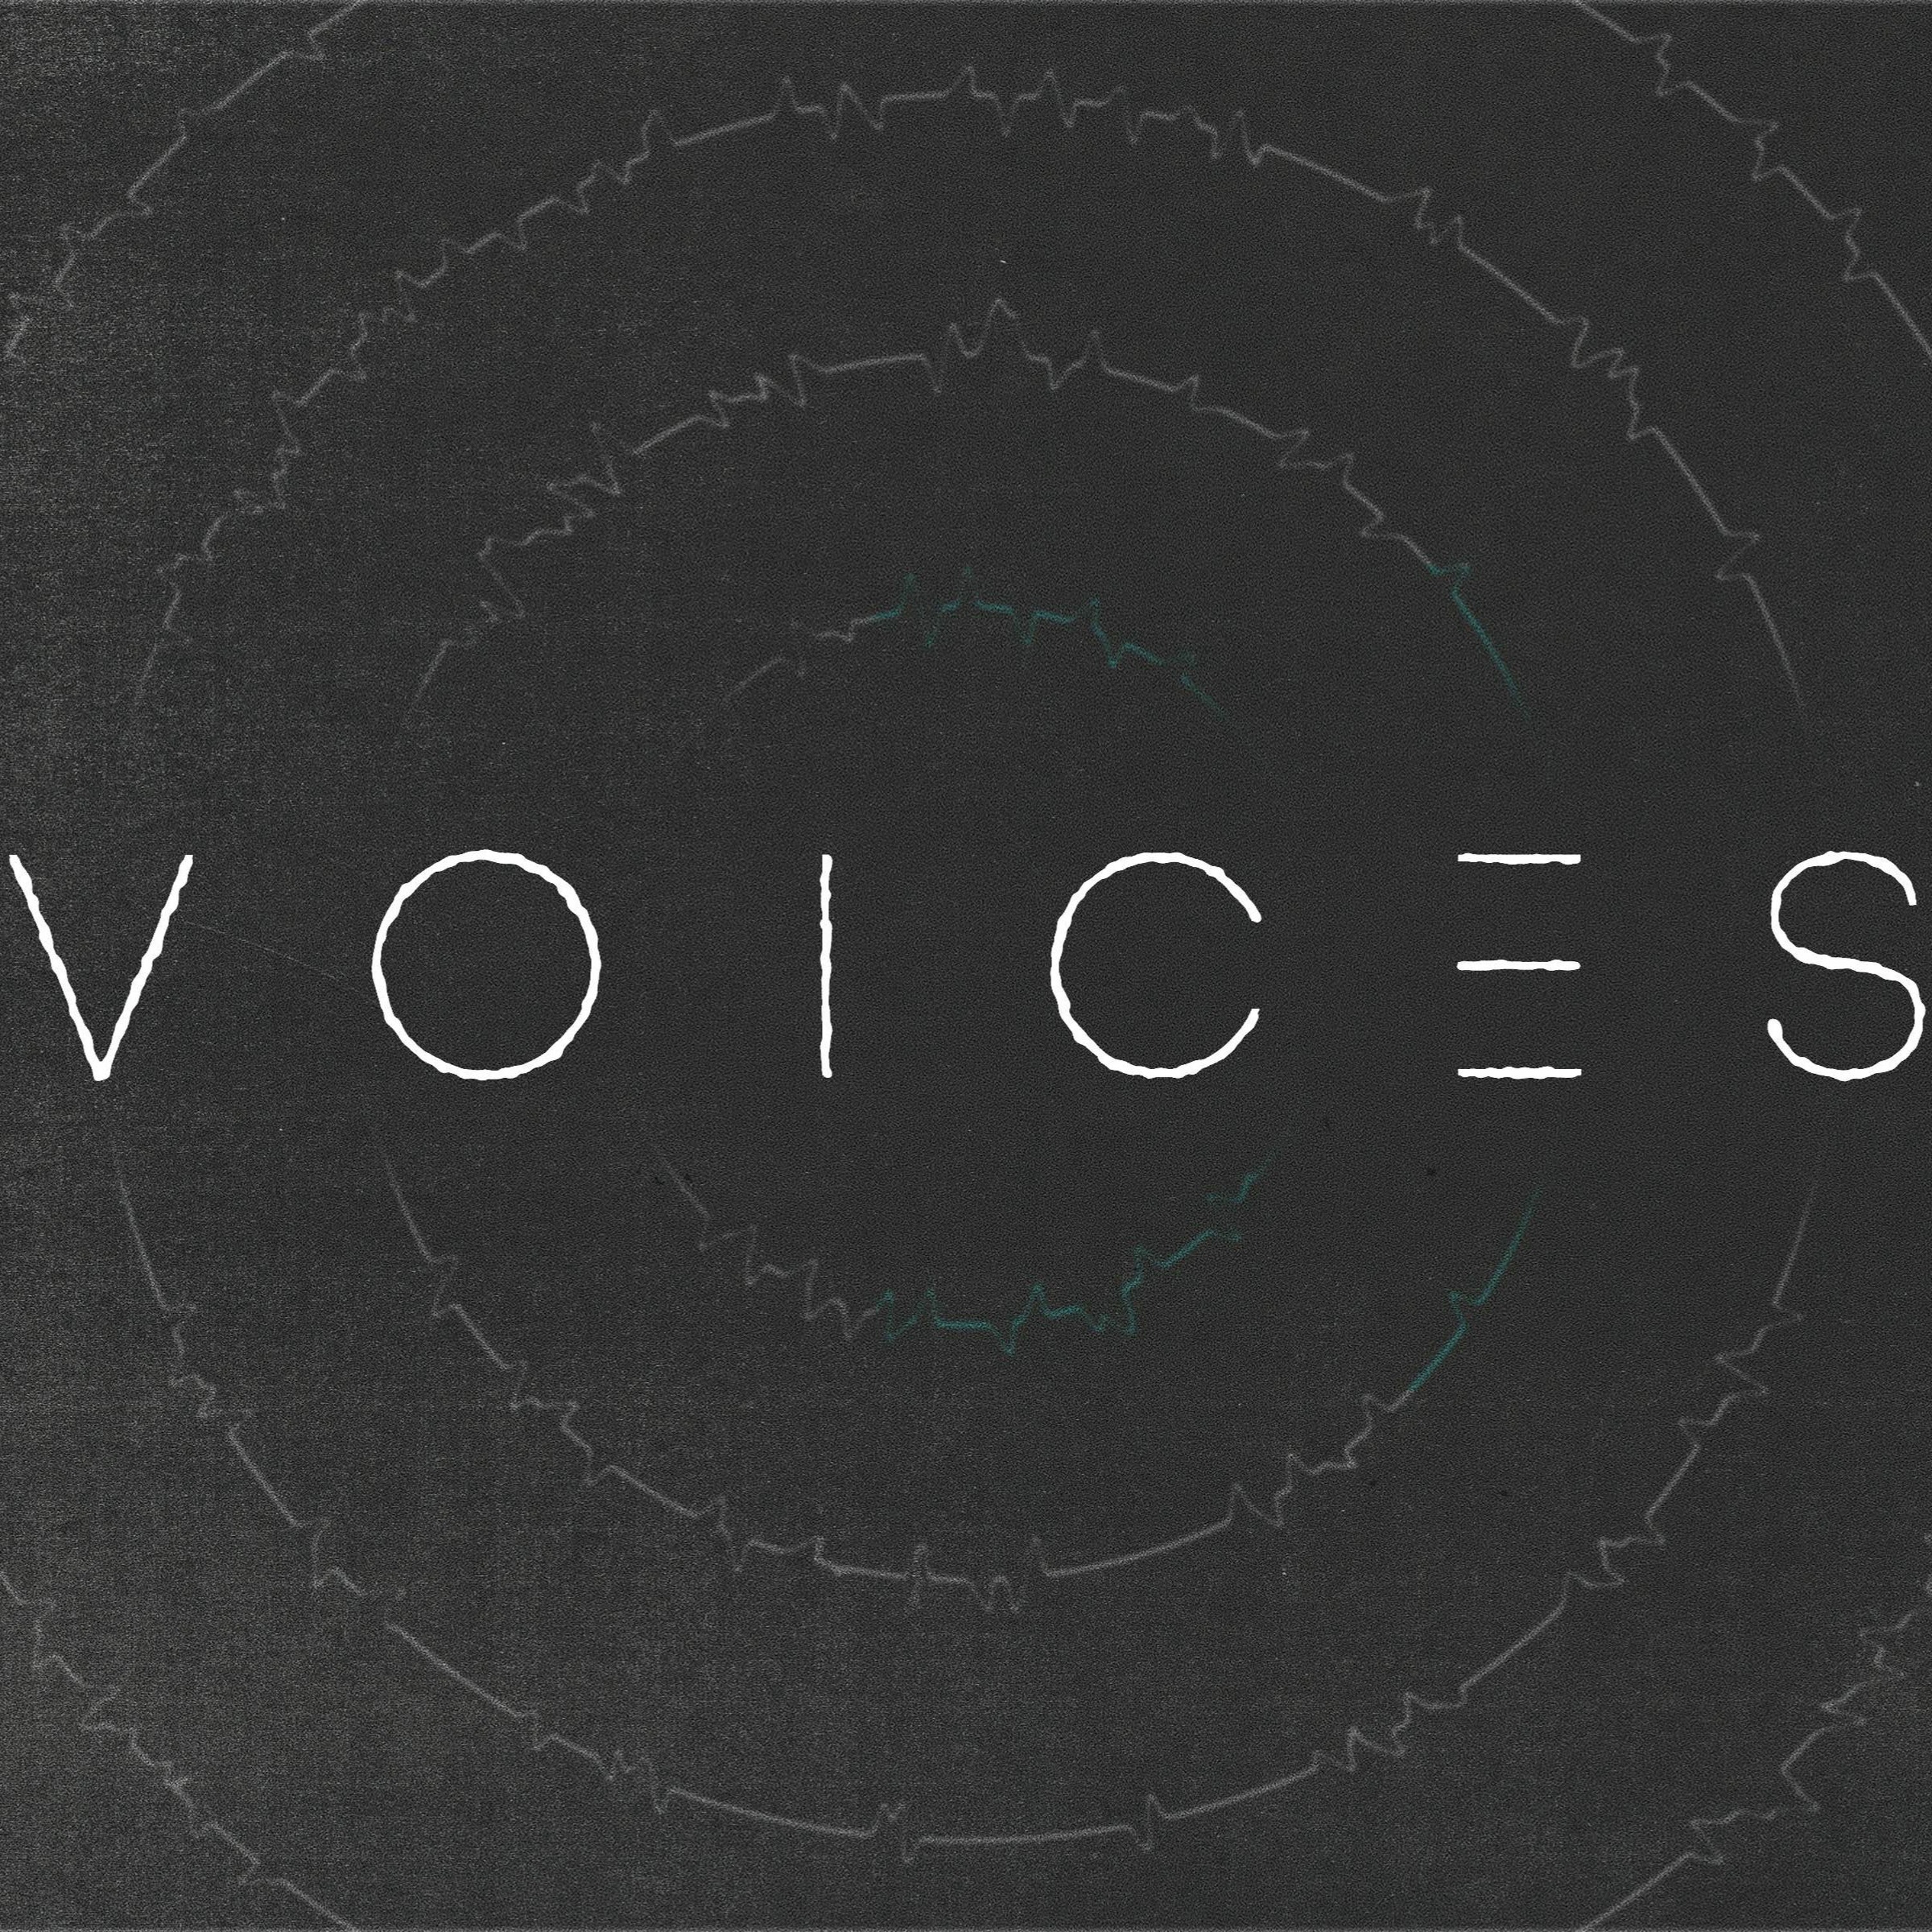 Vices or Virtues :: Voices Pt. 3